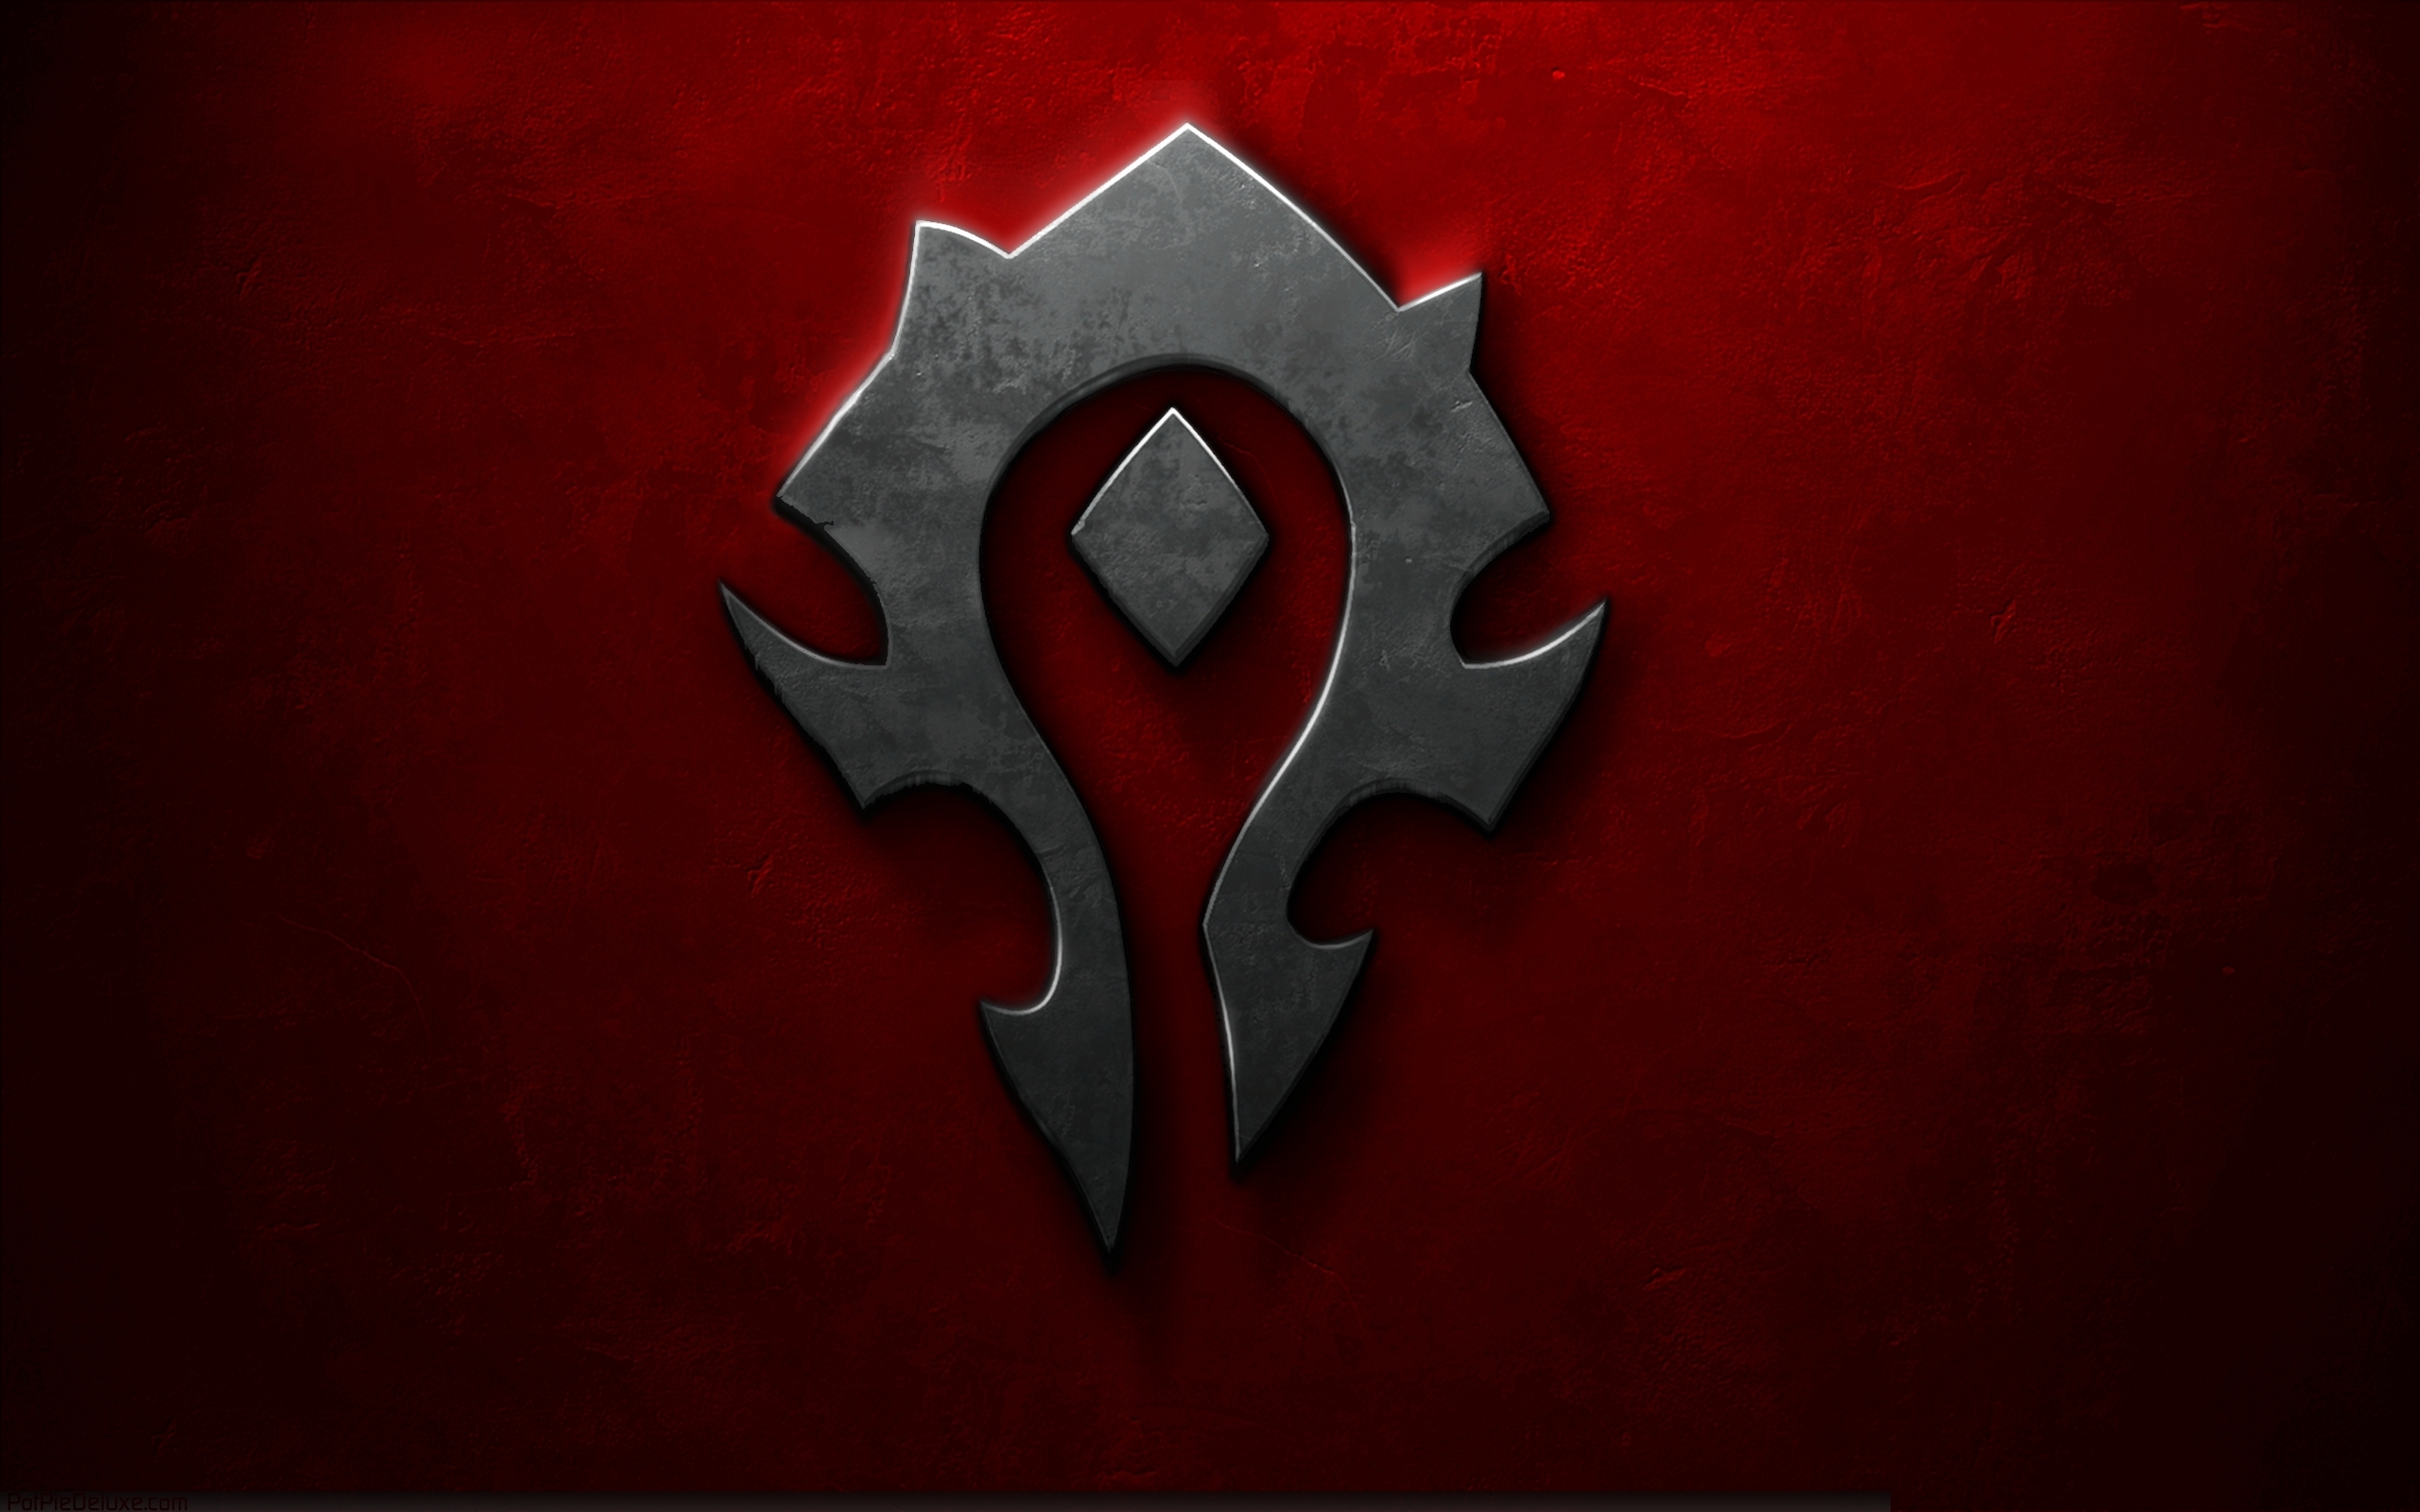 Video games world of warcraft pc horde HD Wallpapers 2560x1600